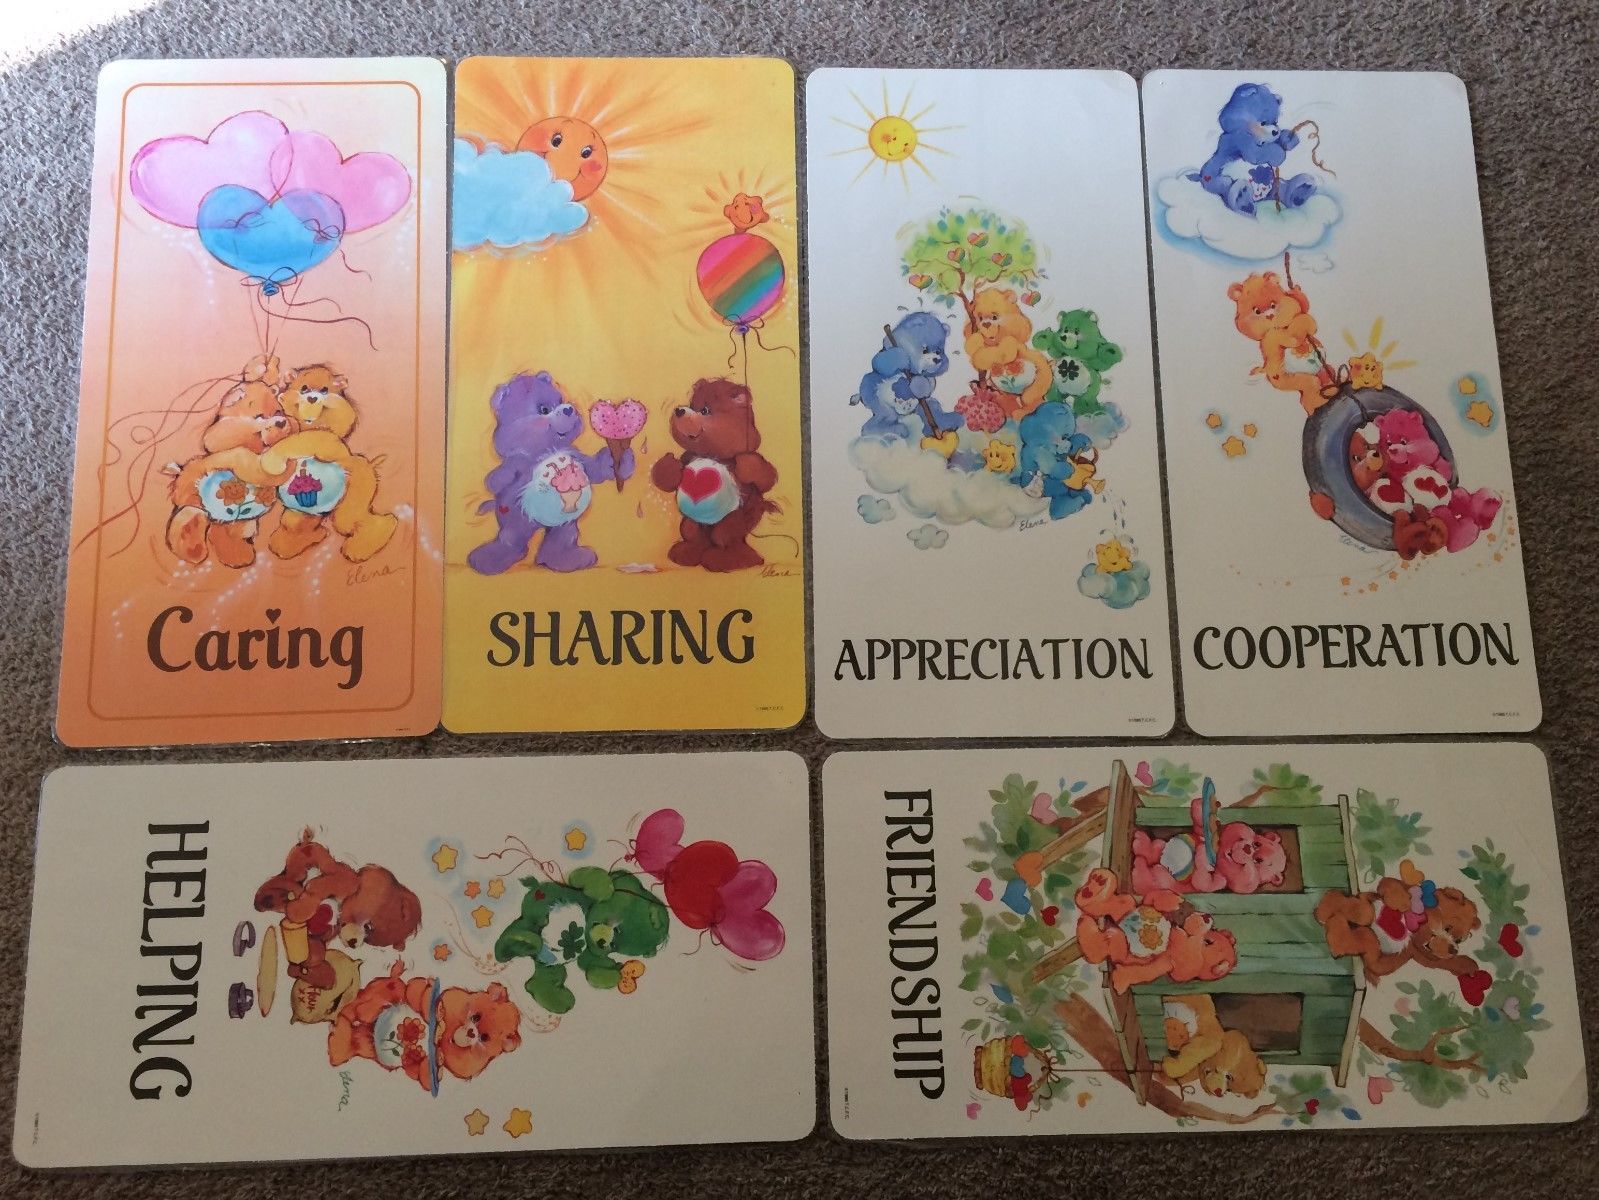 Care bears poster, Vintage Teachers Motivational Classroom Posters, Collectible